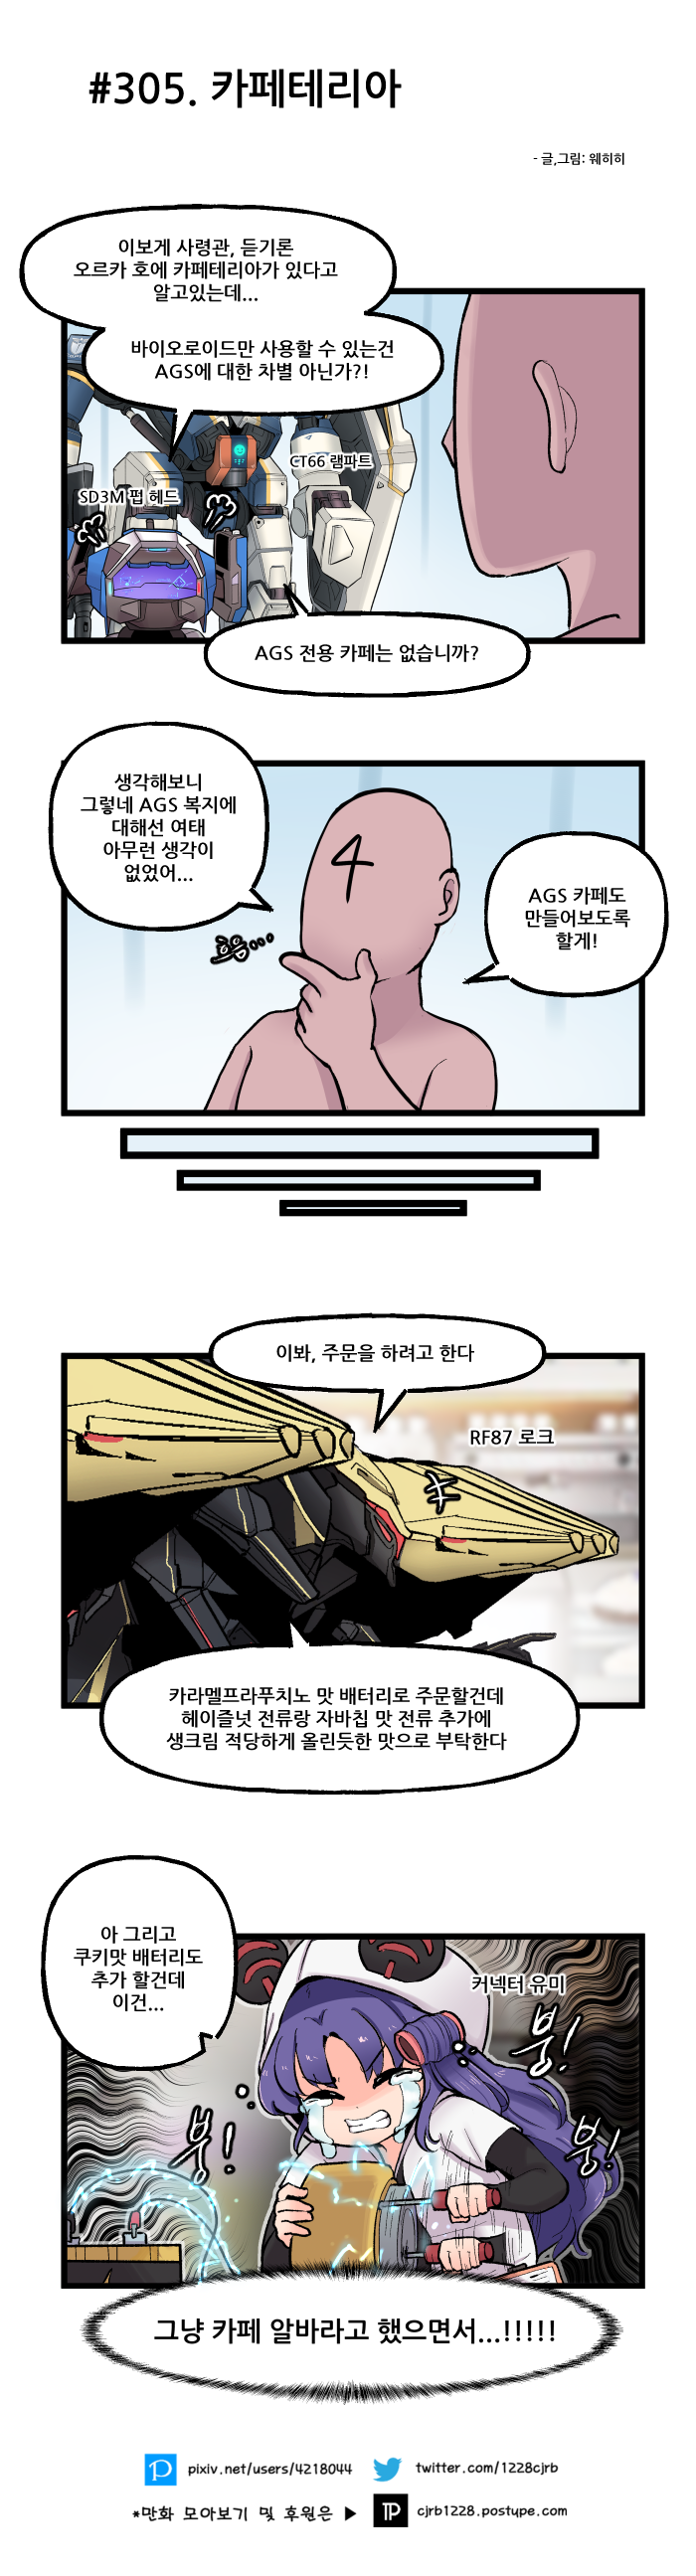 AGS카페.png